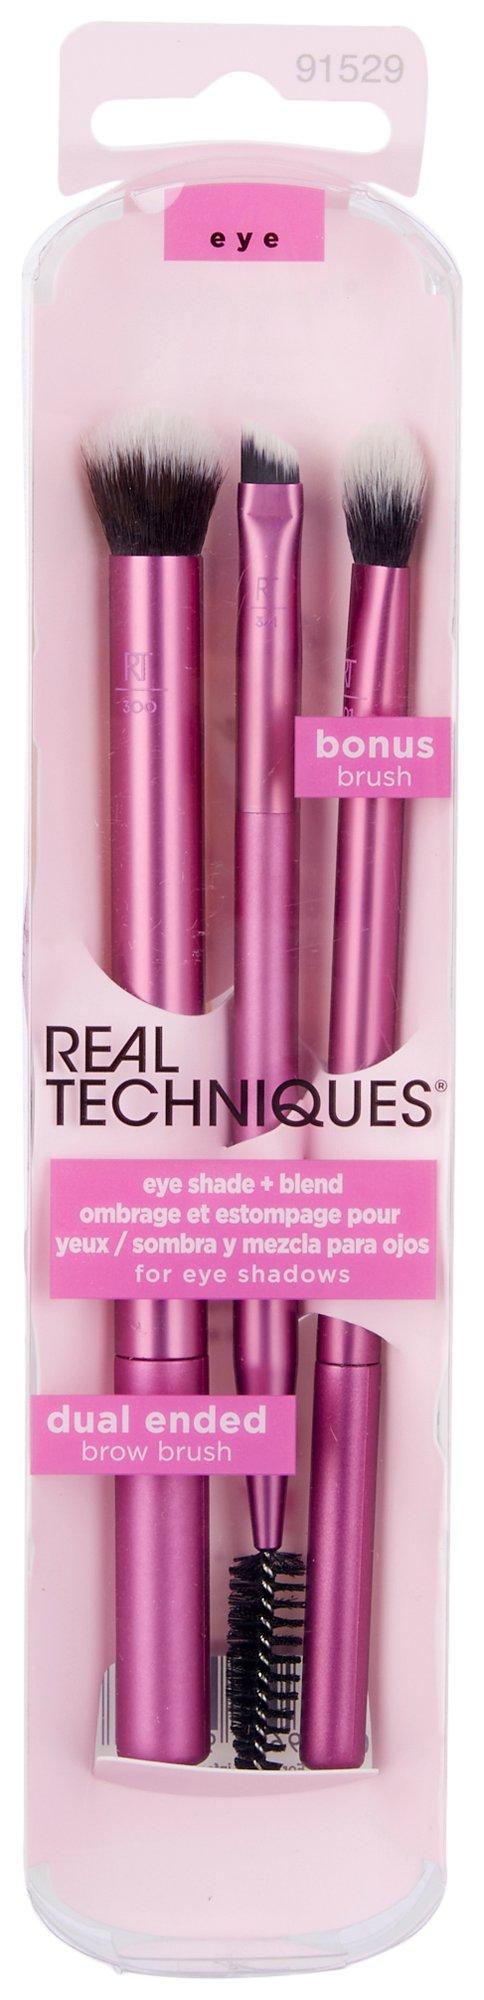 Real Techniques 3-Pc. Eye Shade & Blend Makeup Brush Set